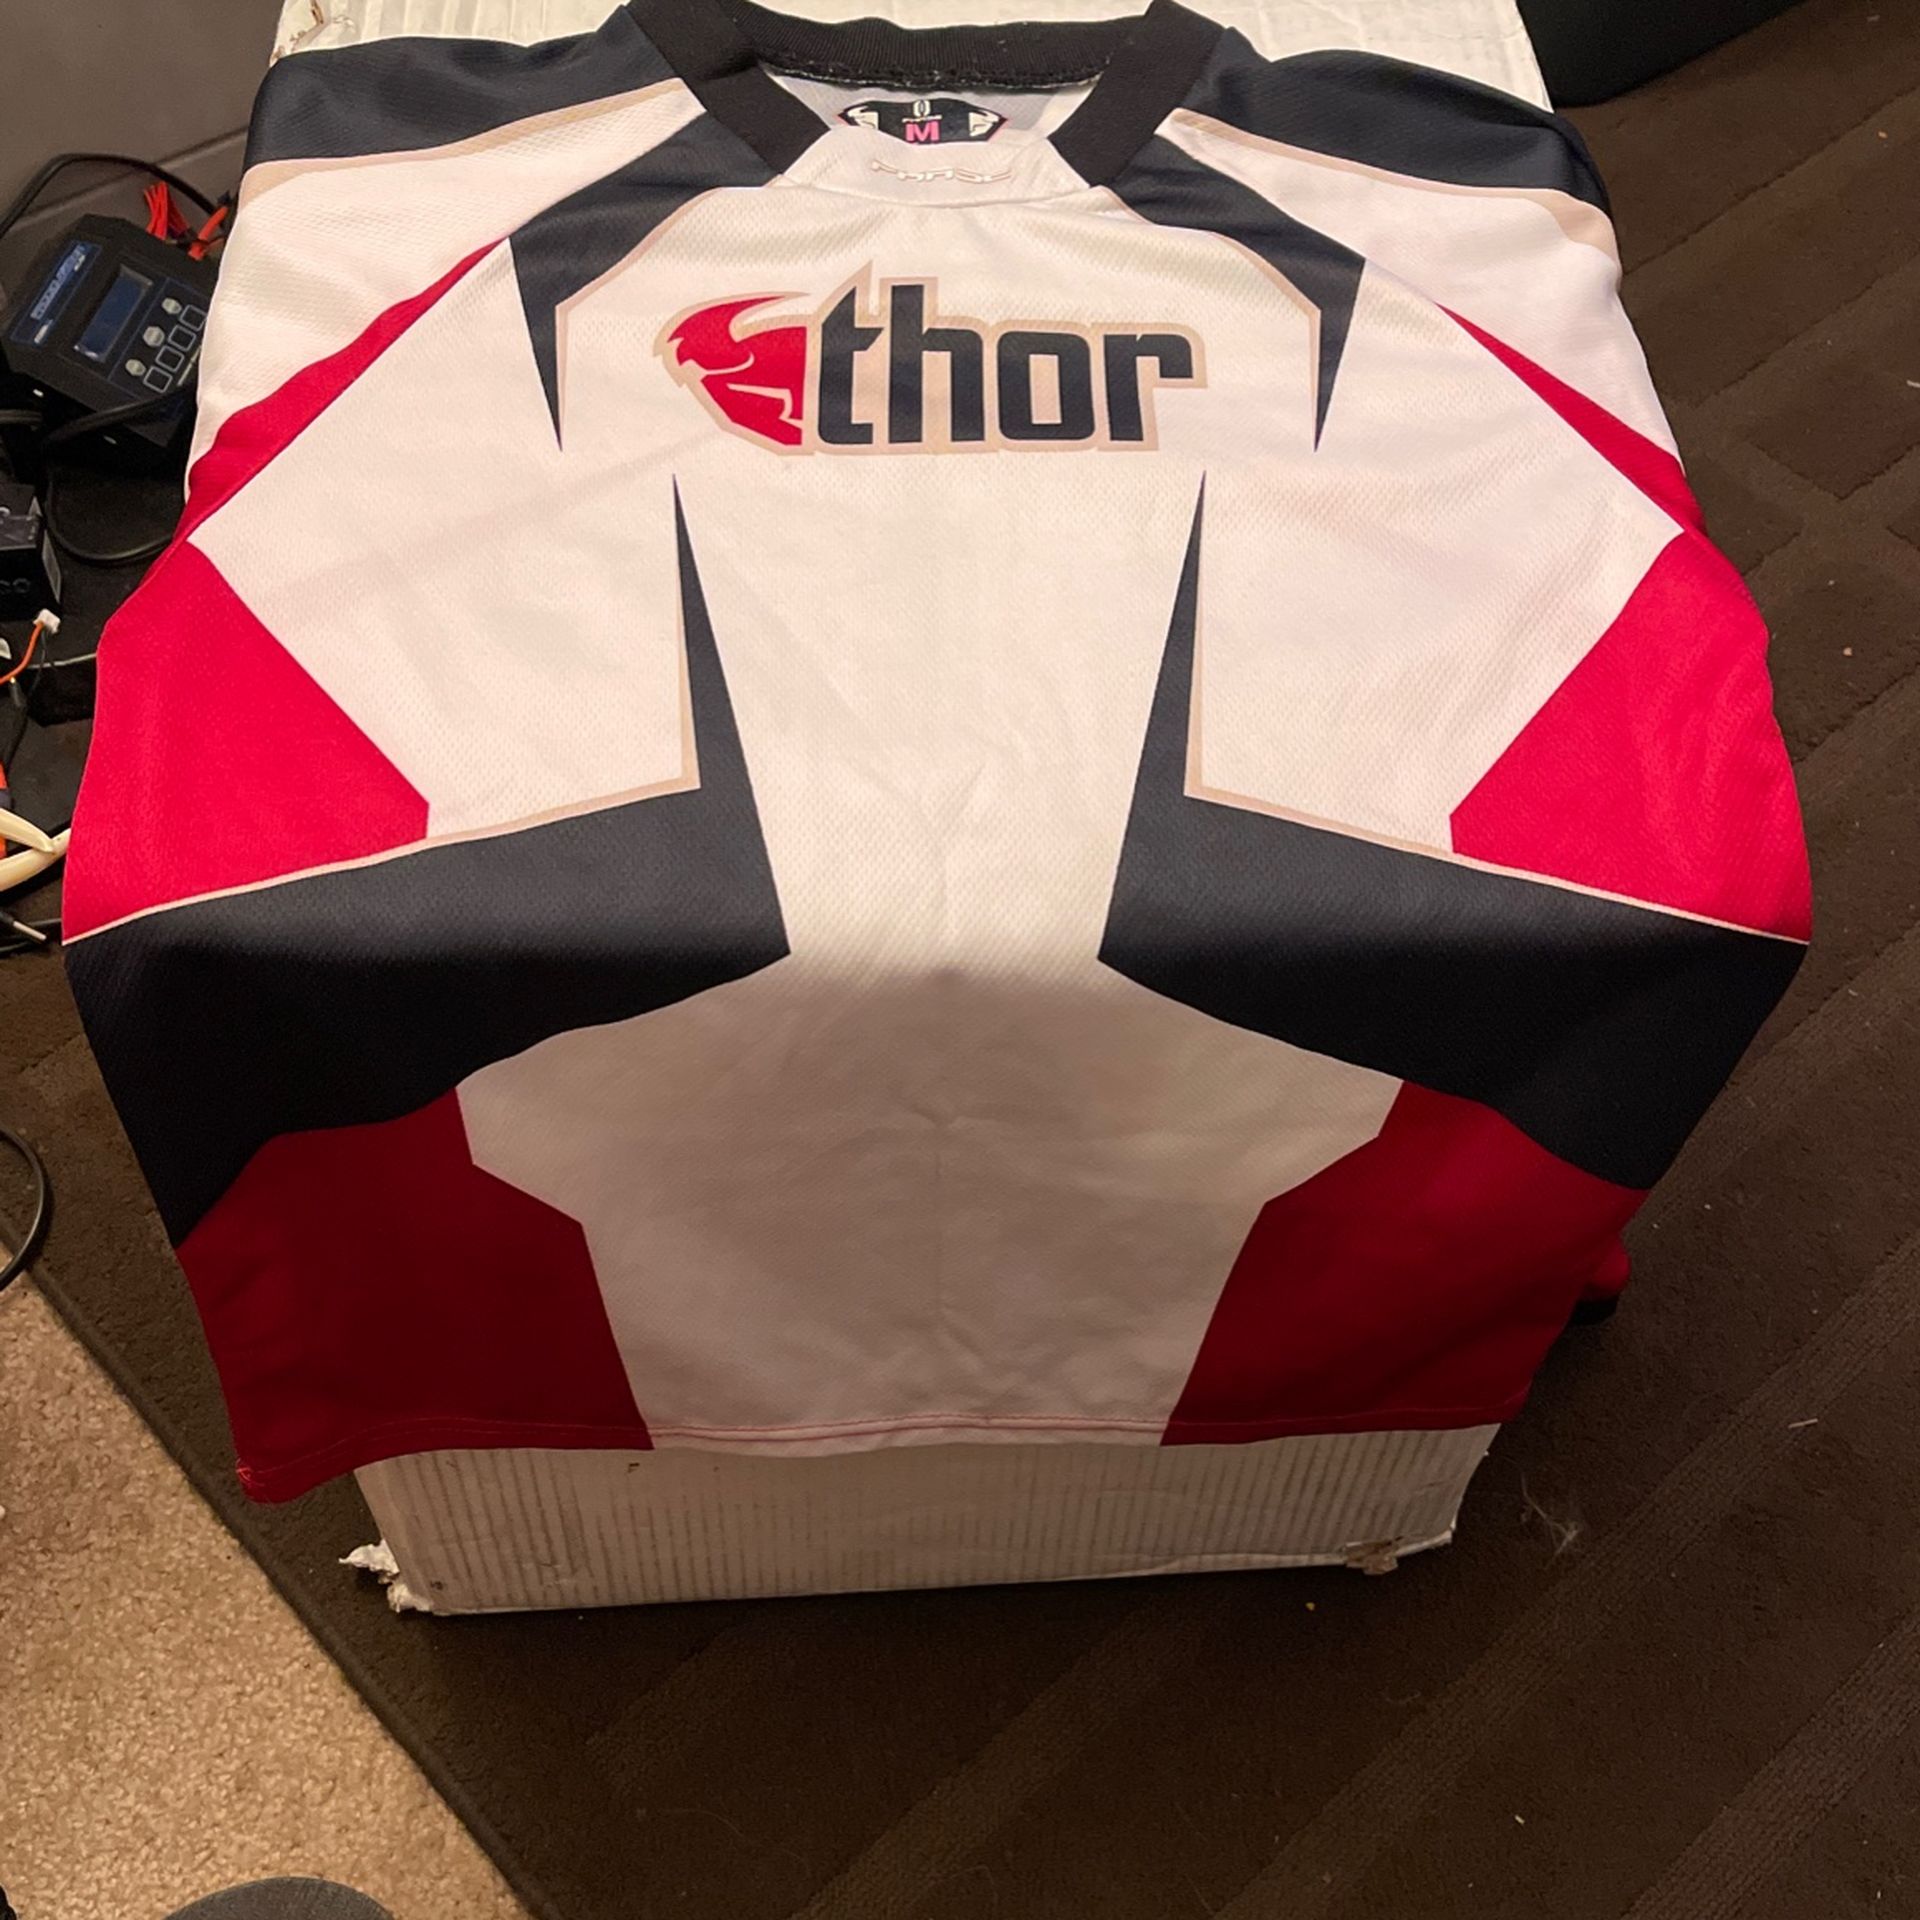 Kids Med Girls Thor Jersey, Only Used A Few Times.